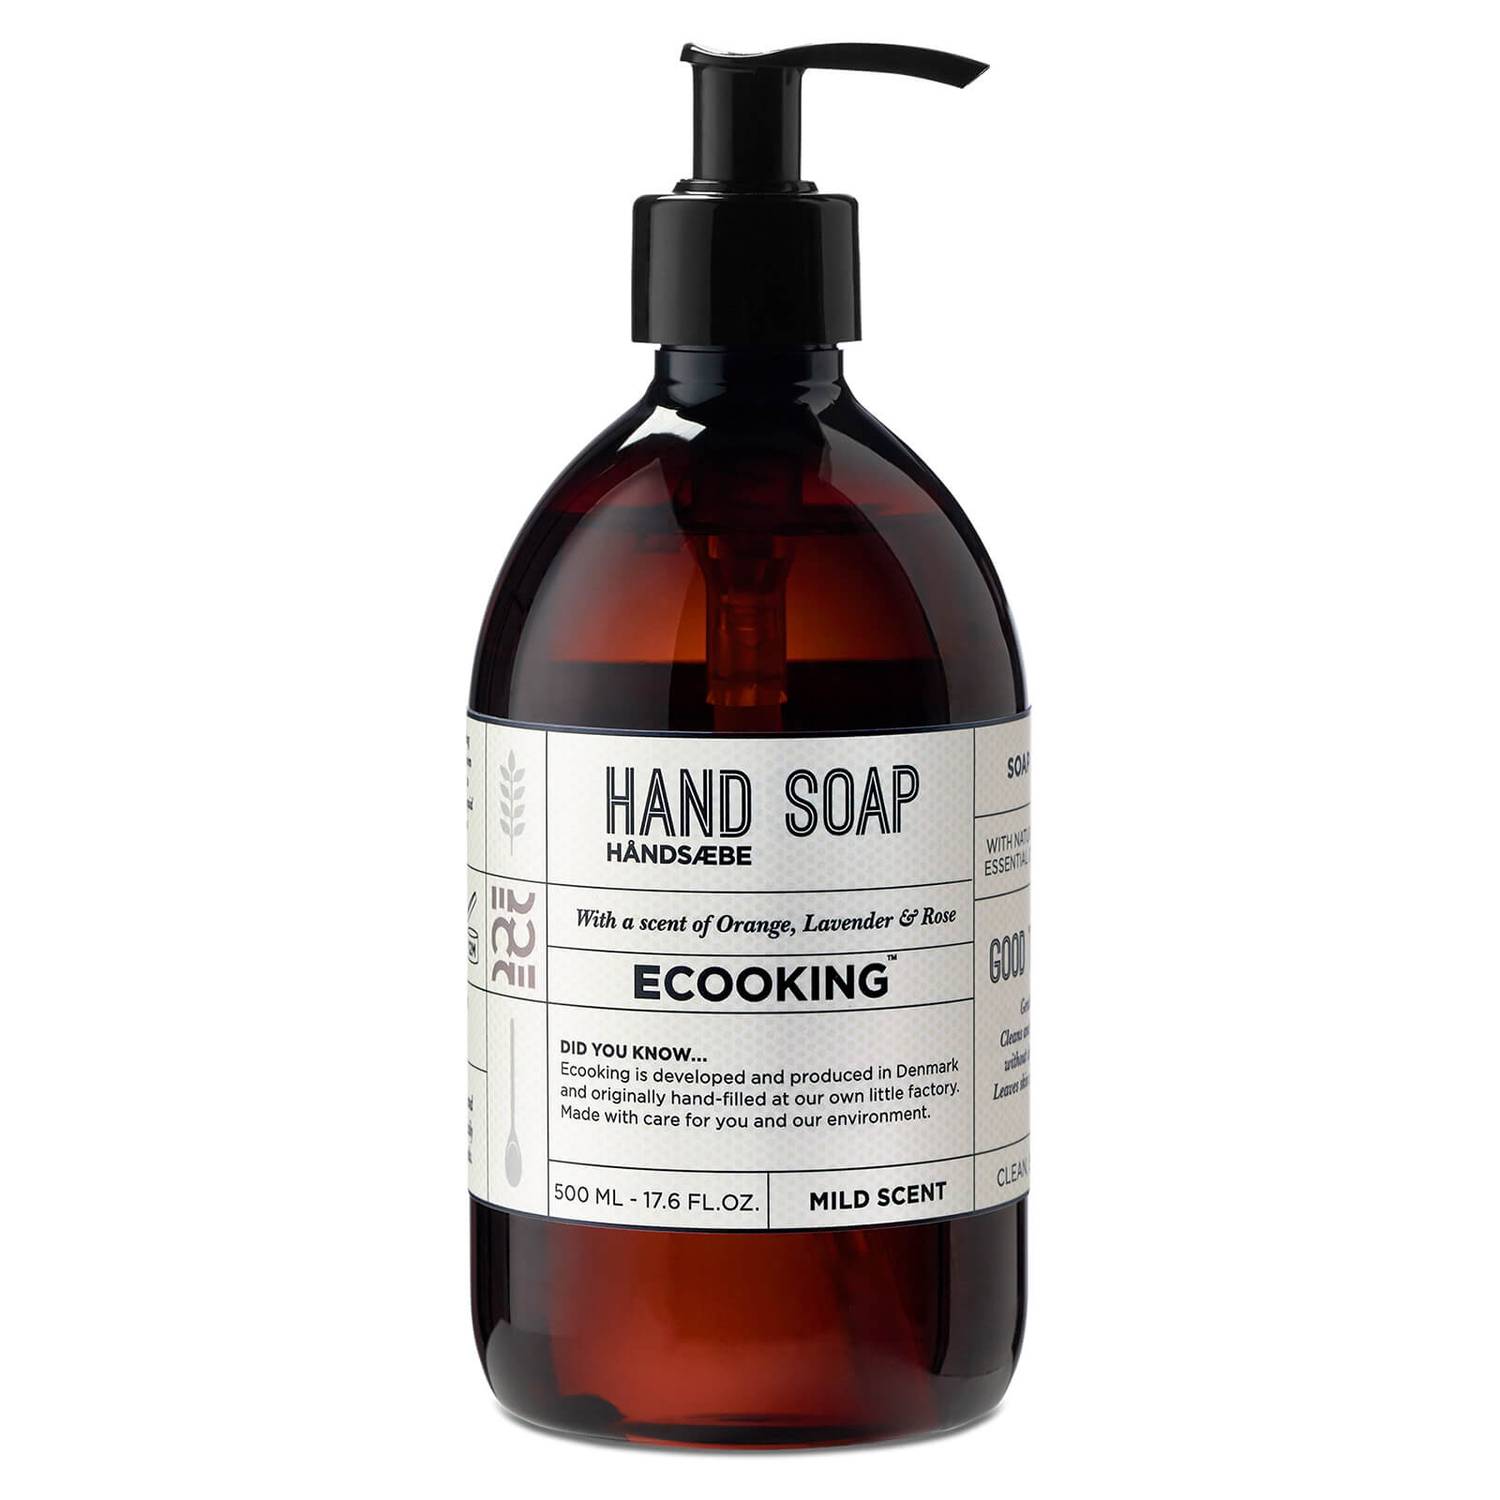 ECOOKING - HAND SOAP